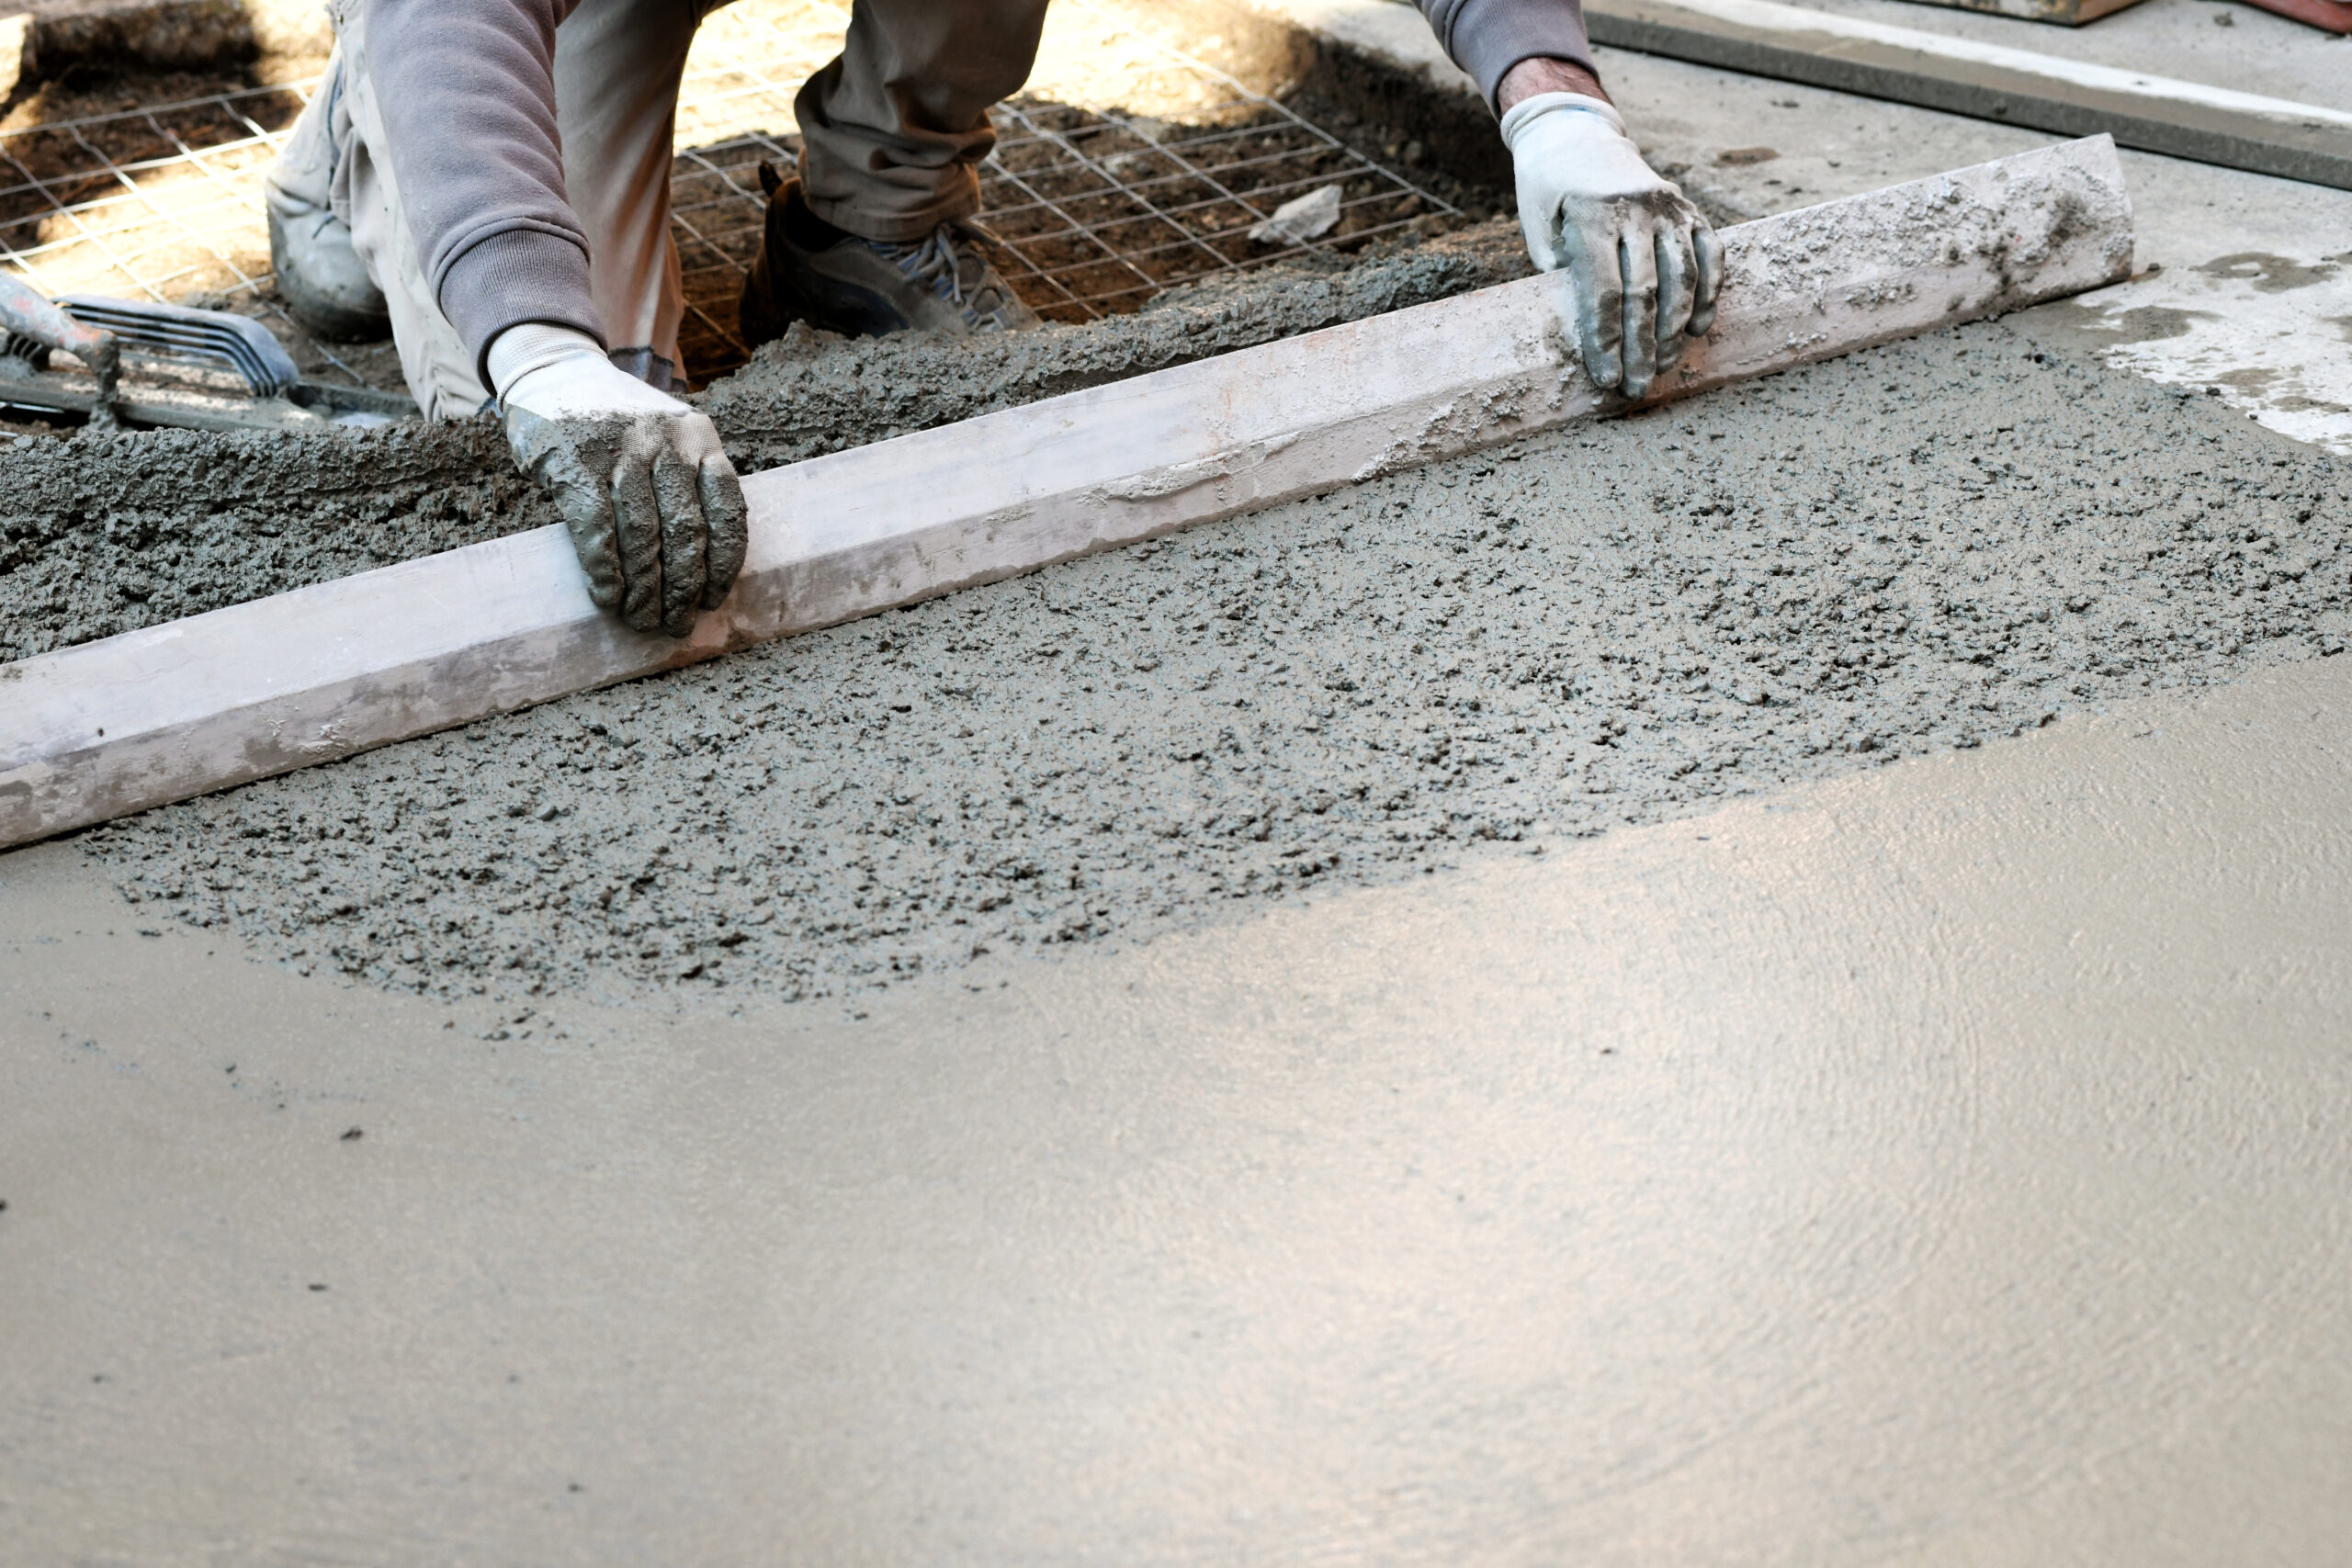 Worker spreading and flattening cement mortar with hand tool, making concrete floor